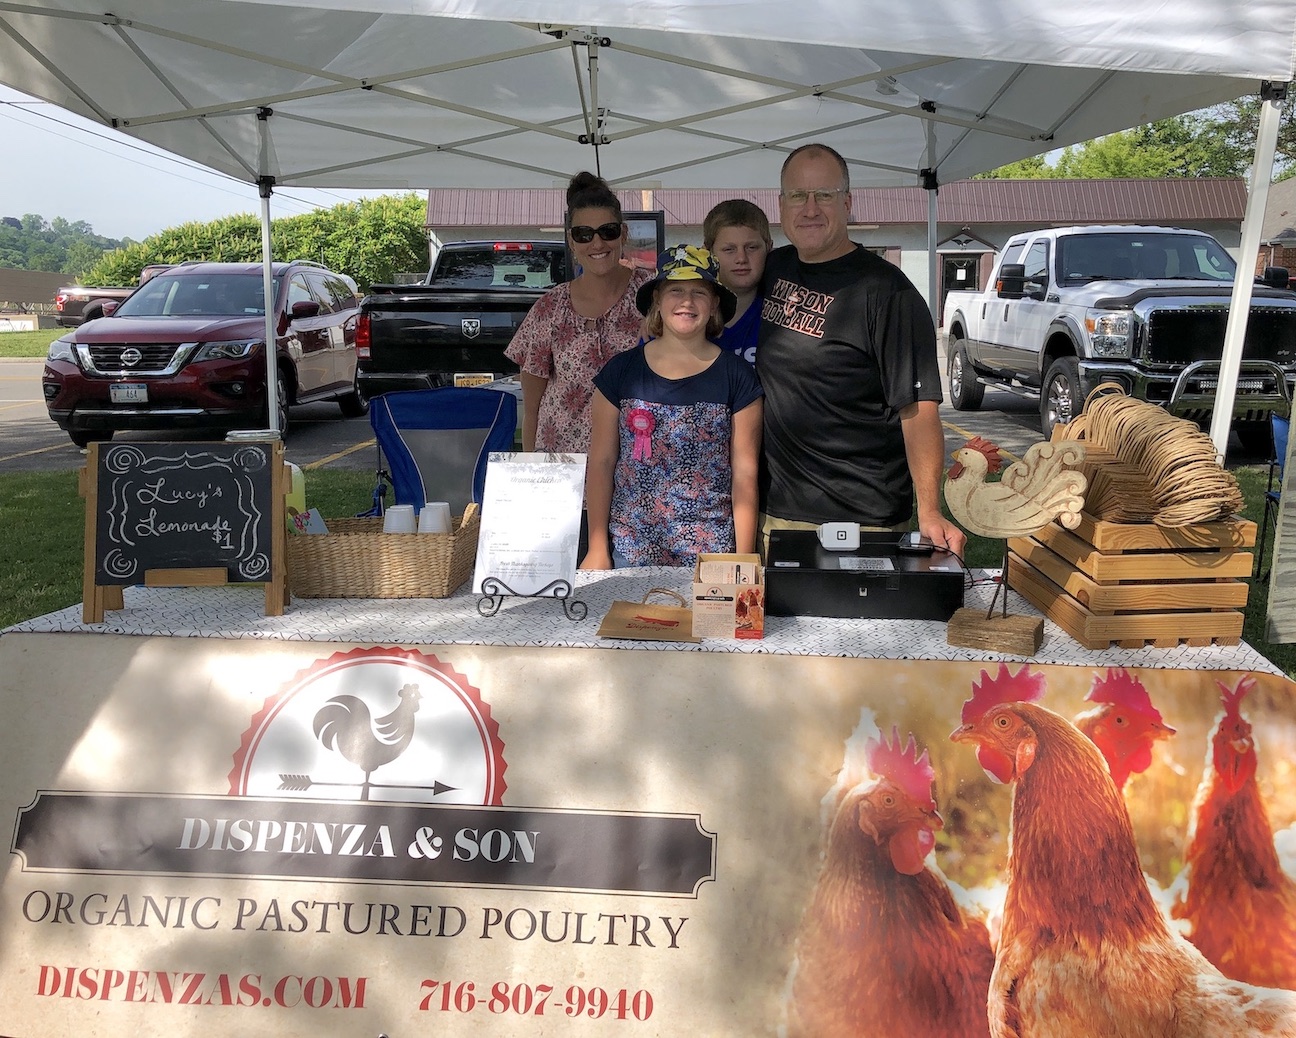 Pictured at the Lewiston Artisan Farmers Market are Rachel, Lucy, Joe and Frank Dispenza.